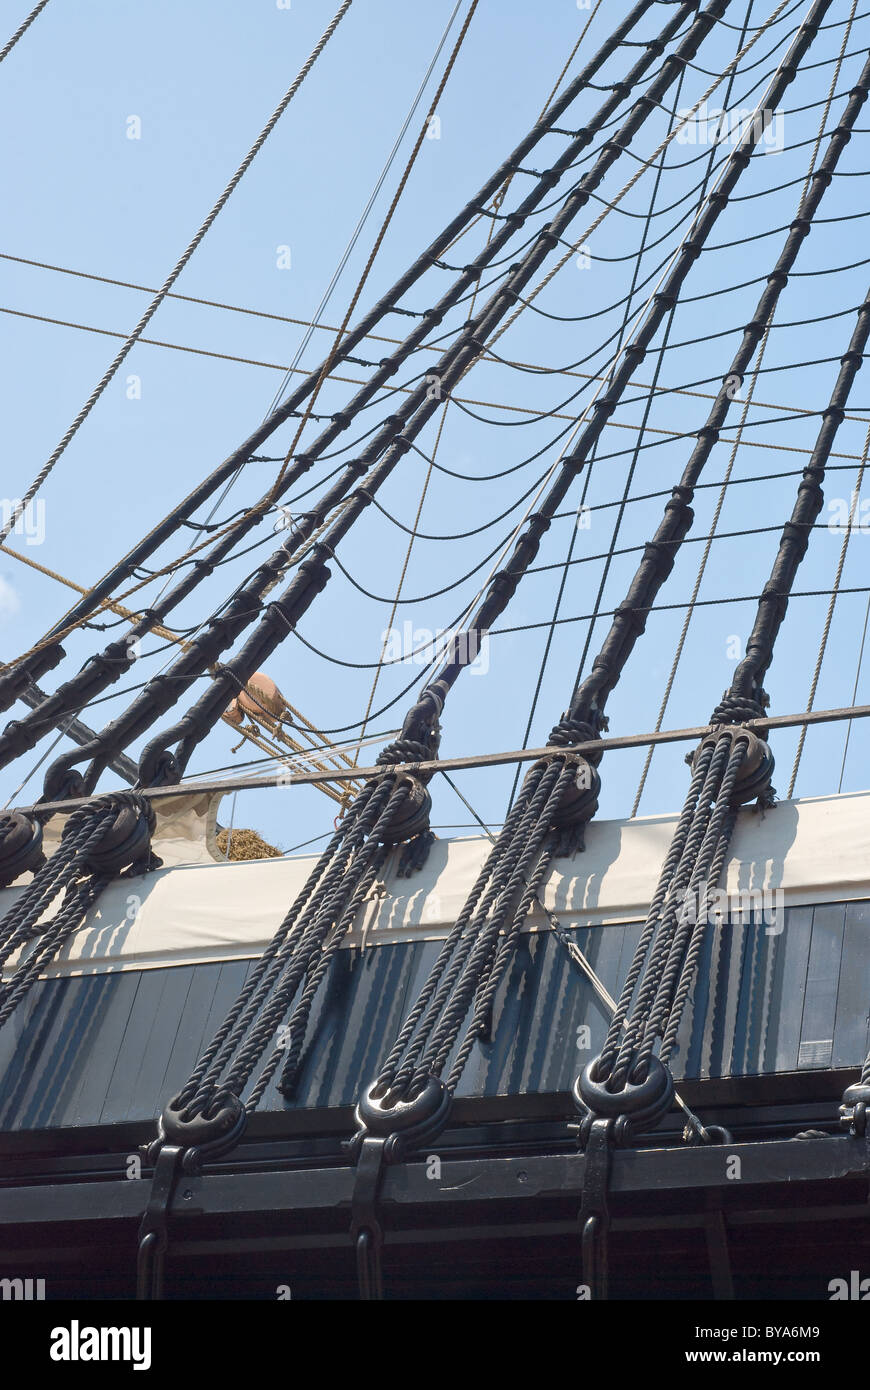 Rigging of the Historic Sailing Ship USS Constellation Stock Photo